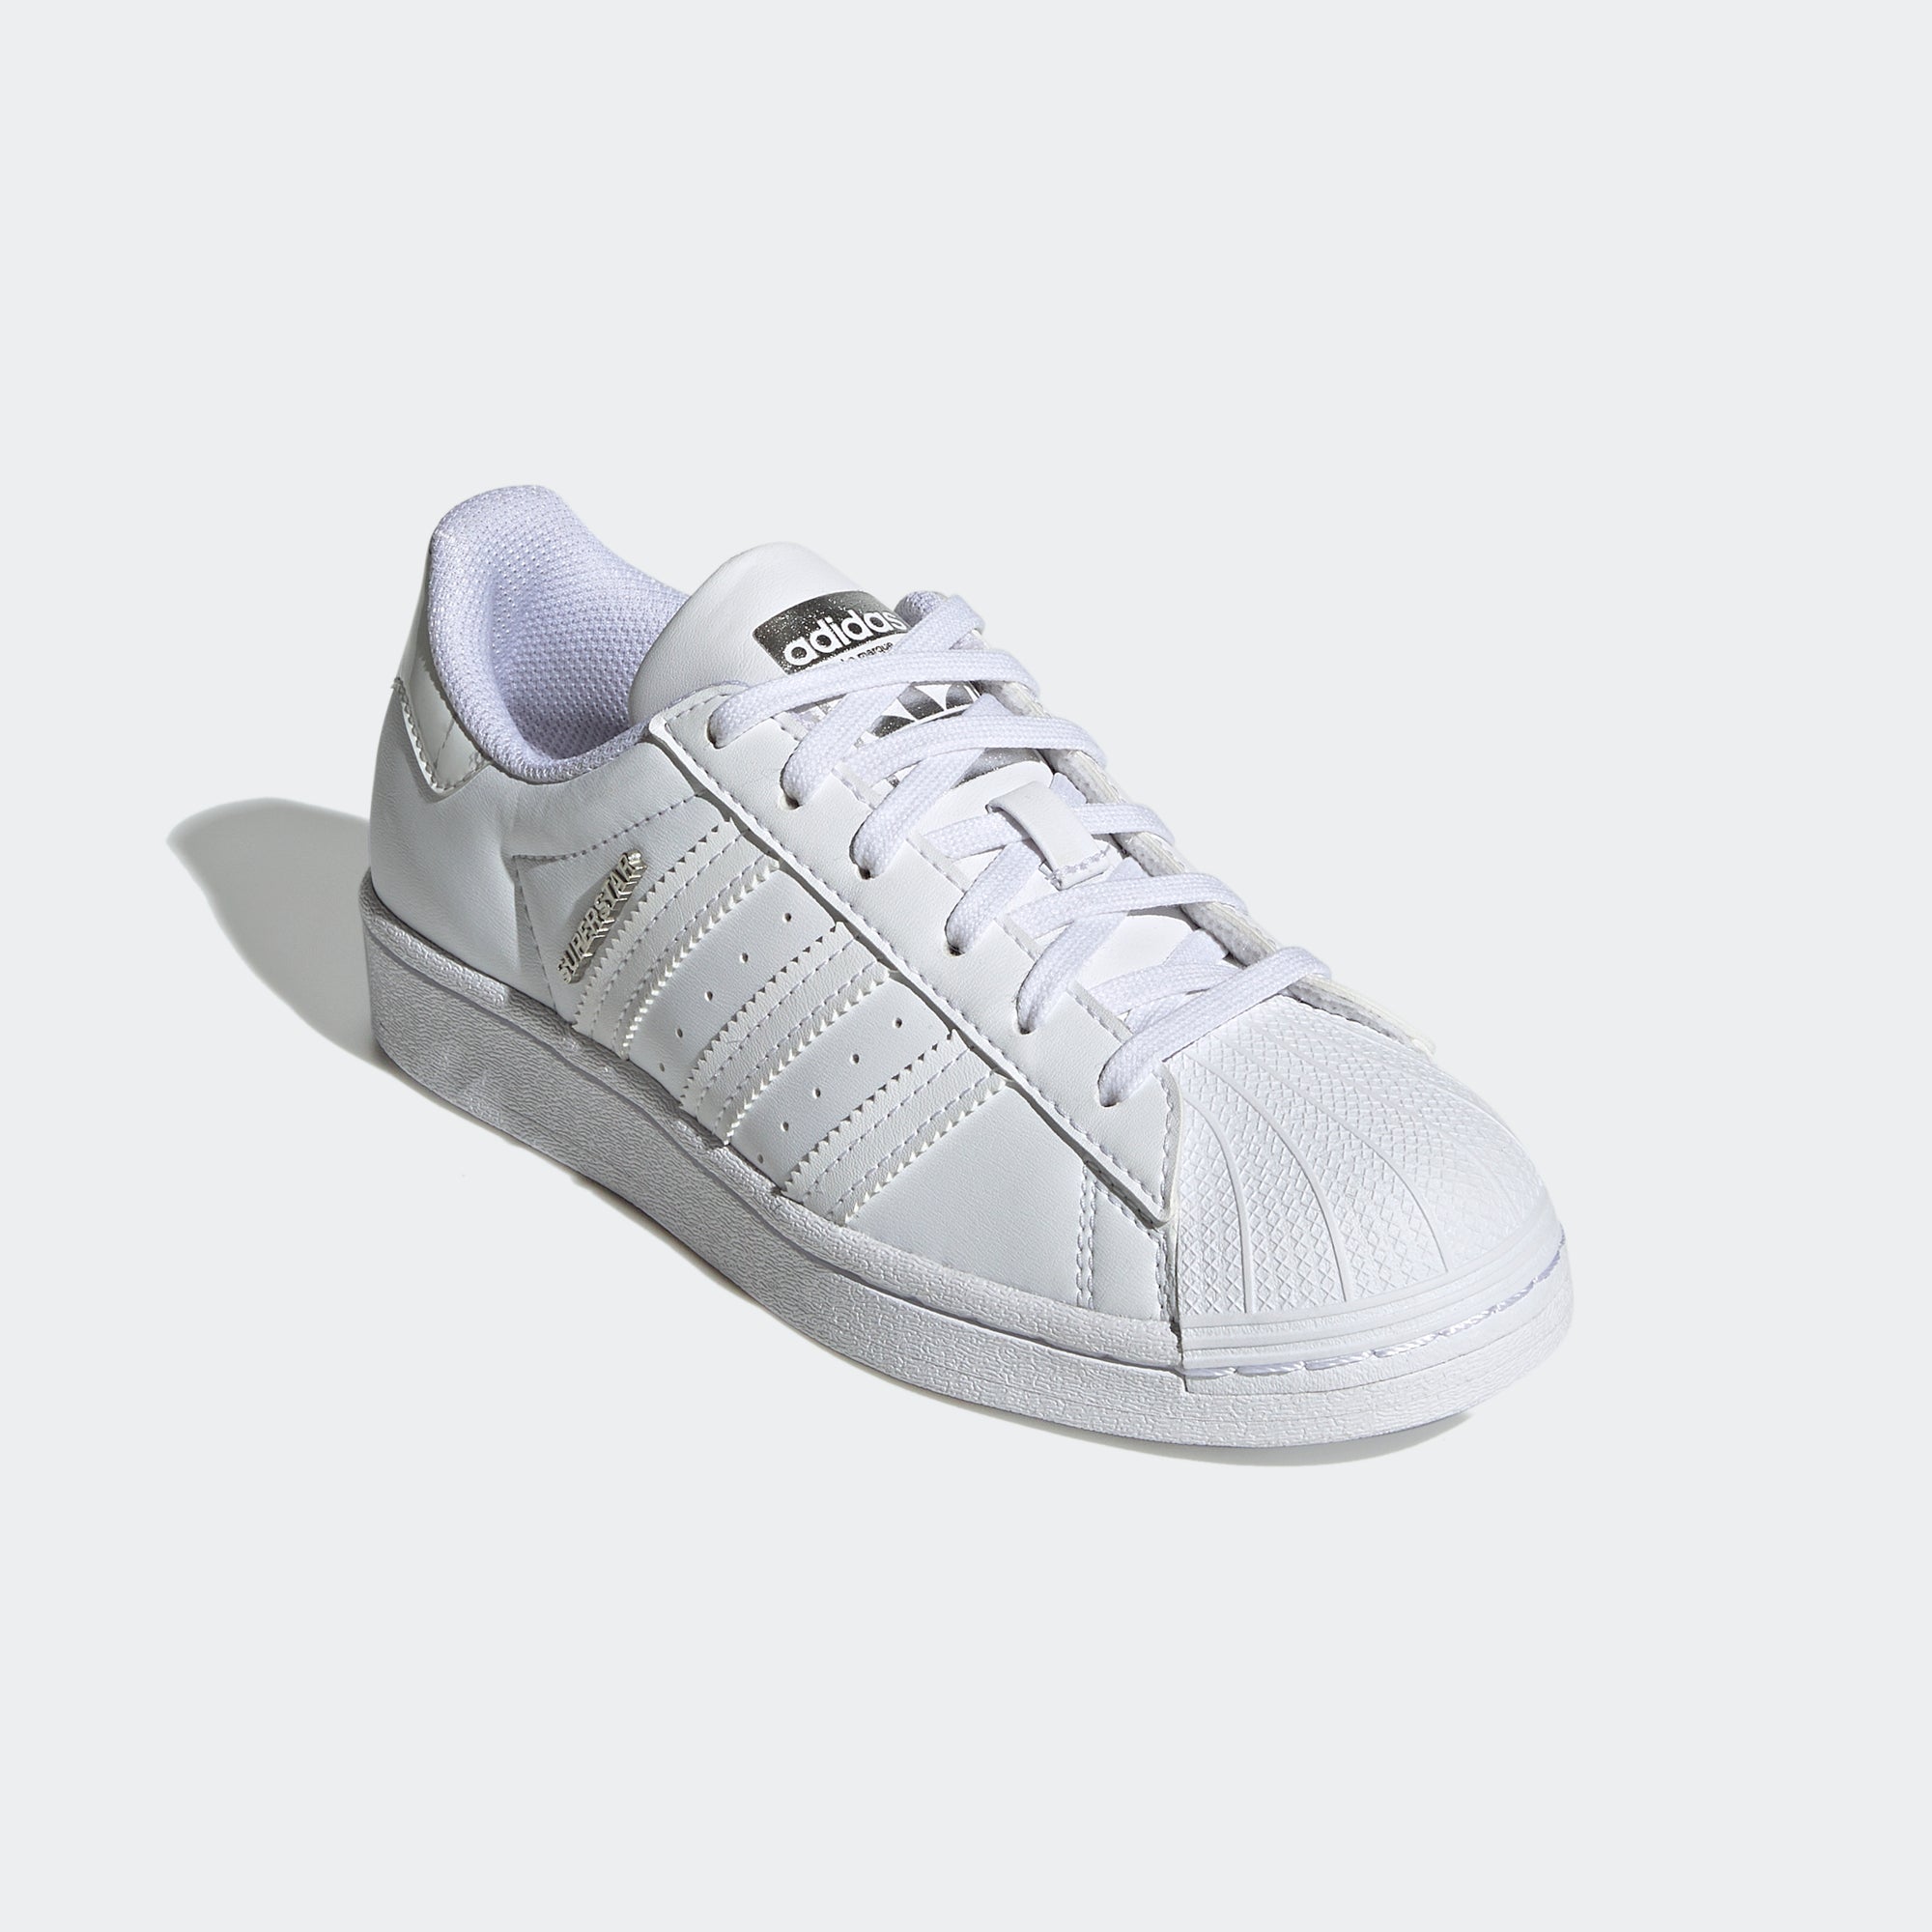 Mammoth Gamle tider squat Kids' adidas Superstar Shoes White H03993 | Chicago City Sports